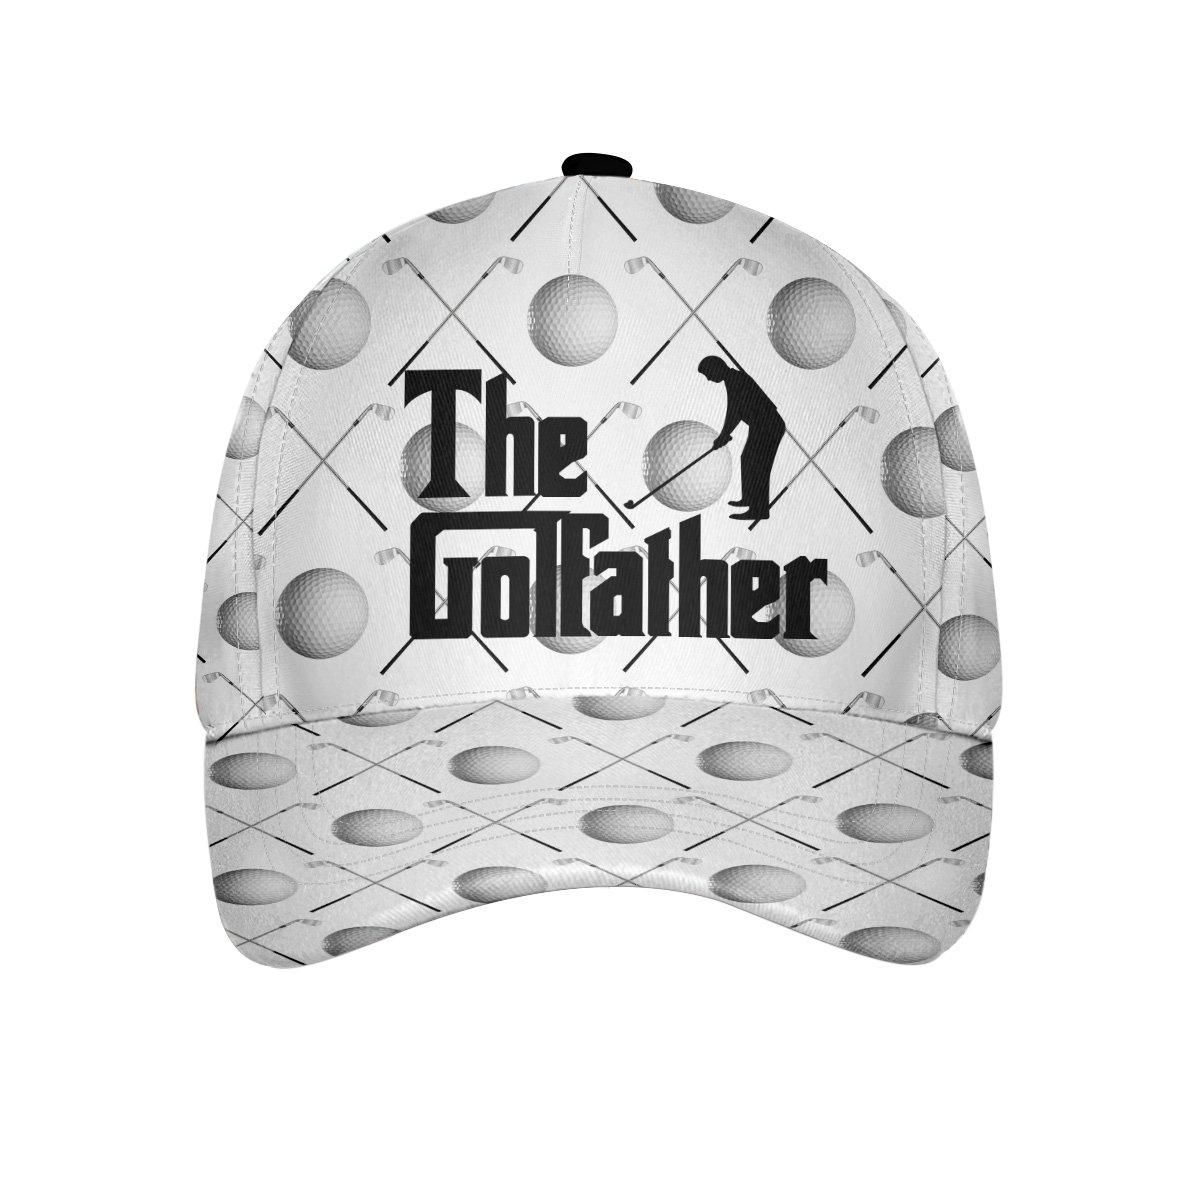 The Golf Father Cap